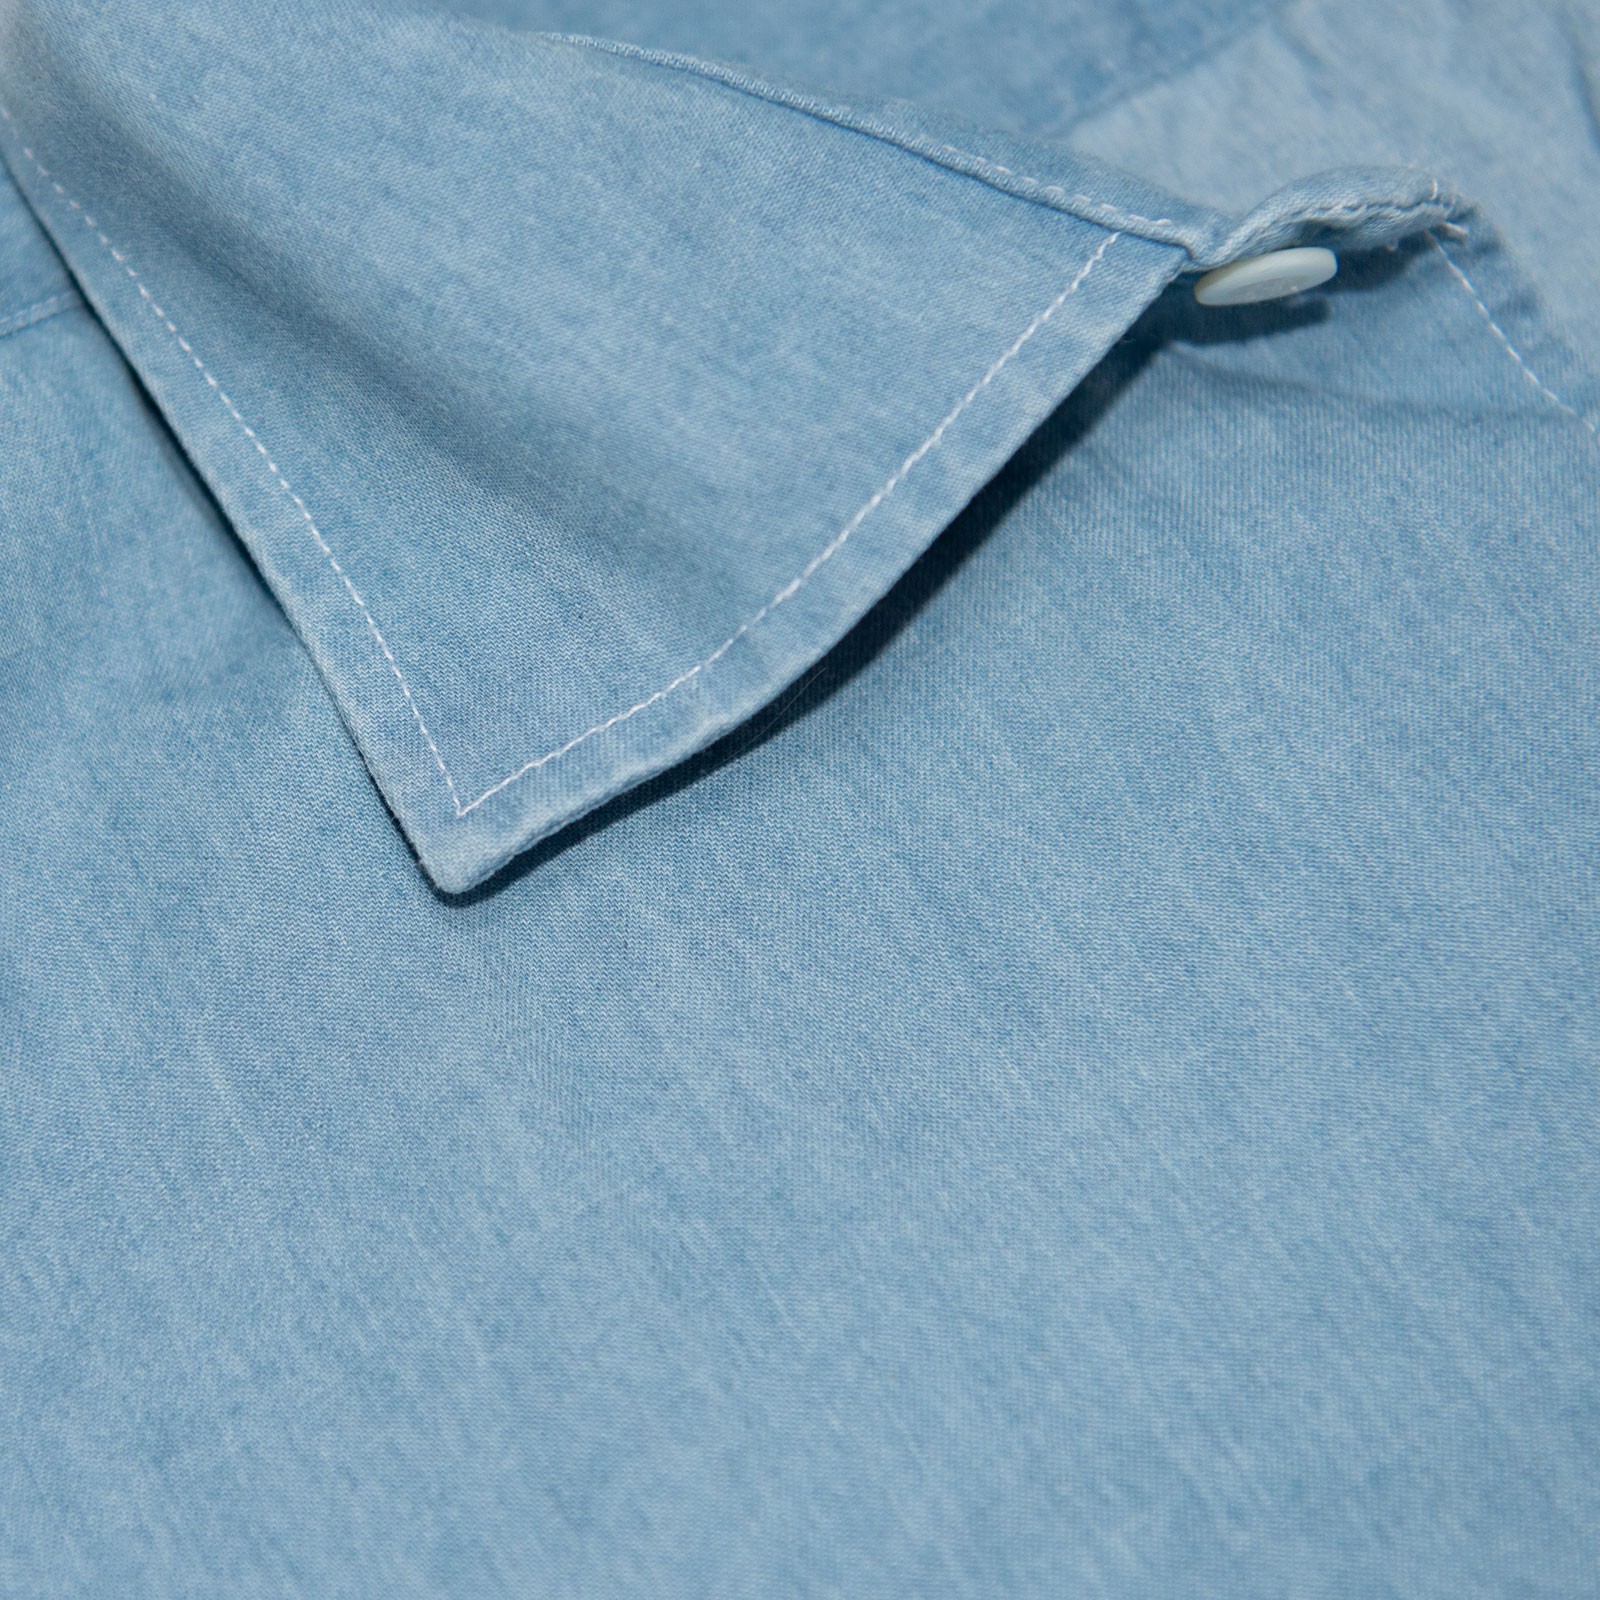 Herring shoes | Herring Sale | Giotto Shirt in Pale Blue at Herring Shoes